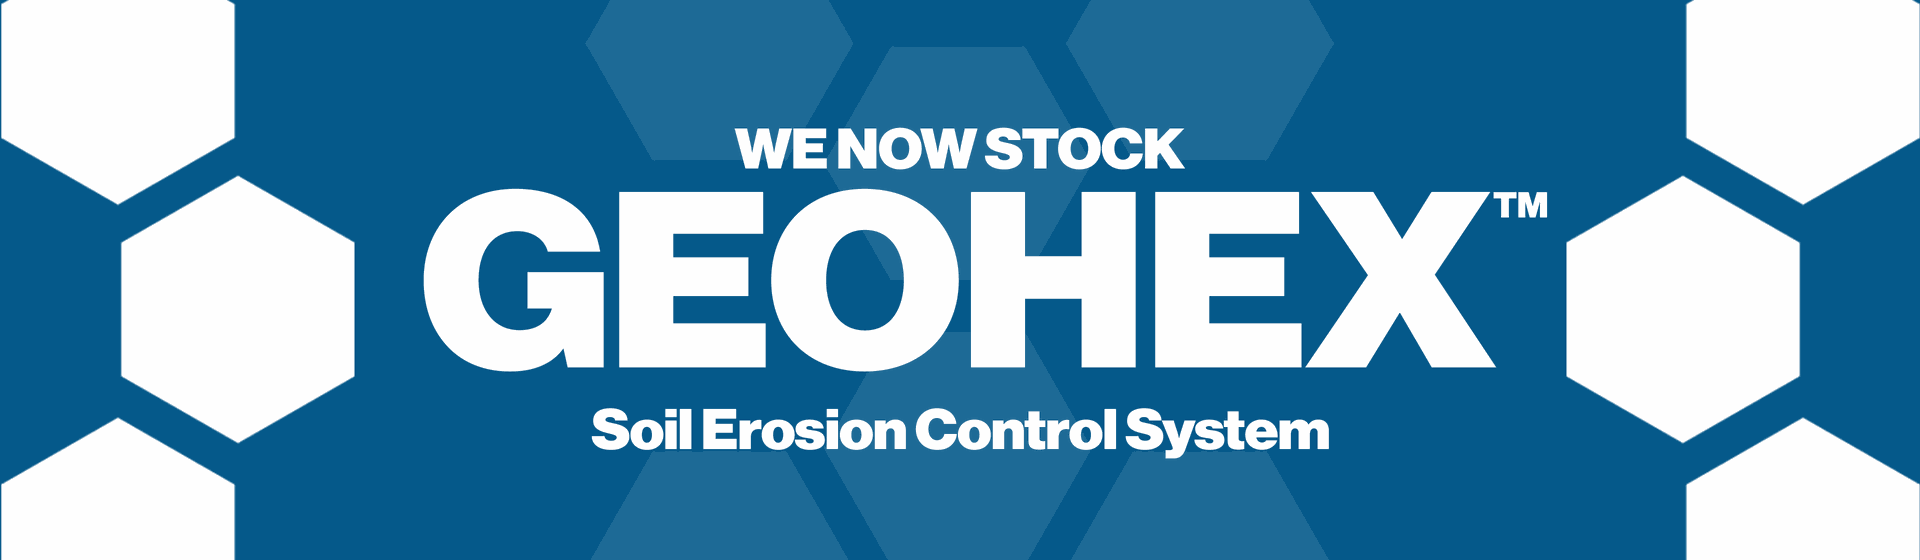 We Now Stock GEOHEX Soil Erosion Control System